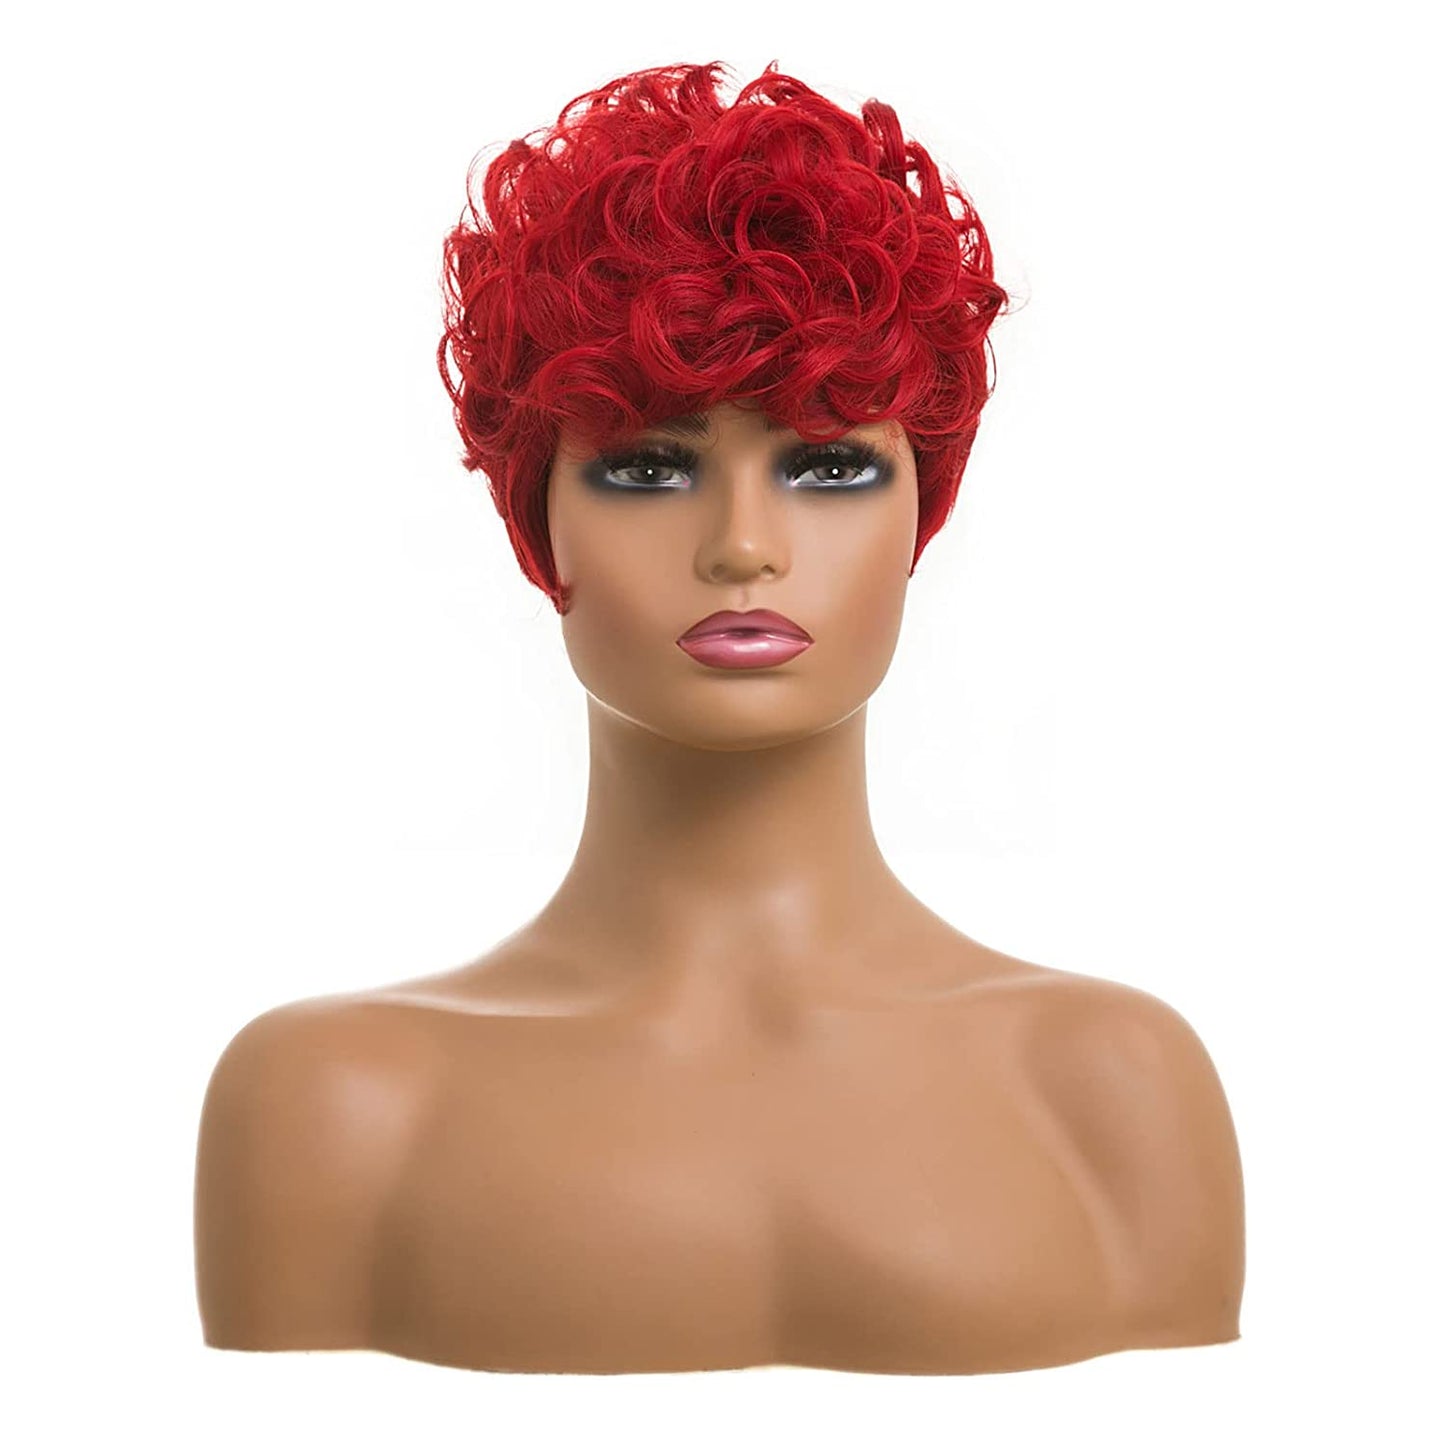 Elegant Red Pixie Cut Wig with Bangs Natural Wavy Synthetic Hair